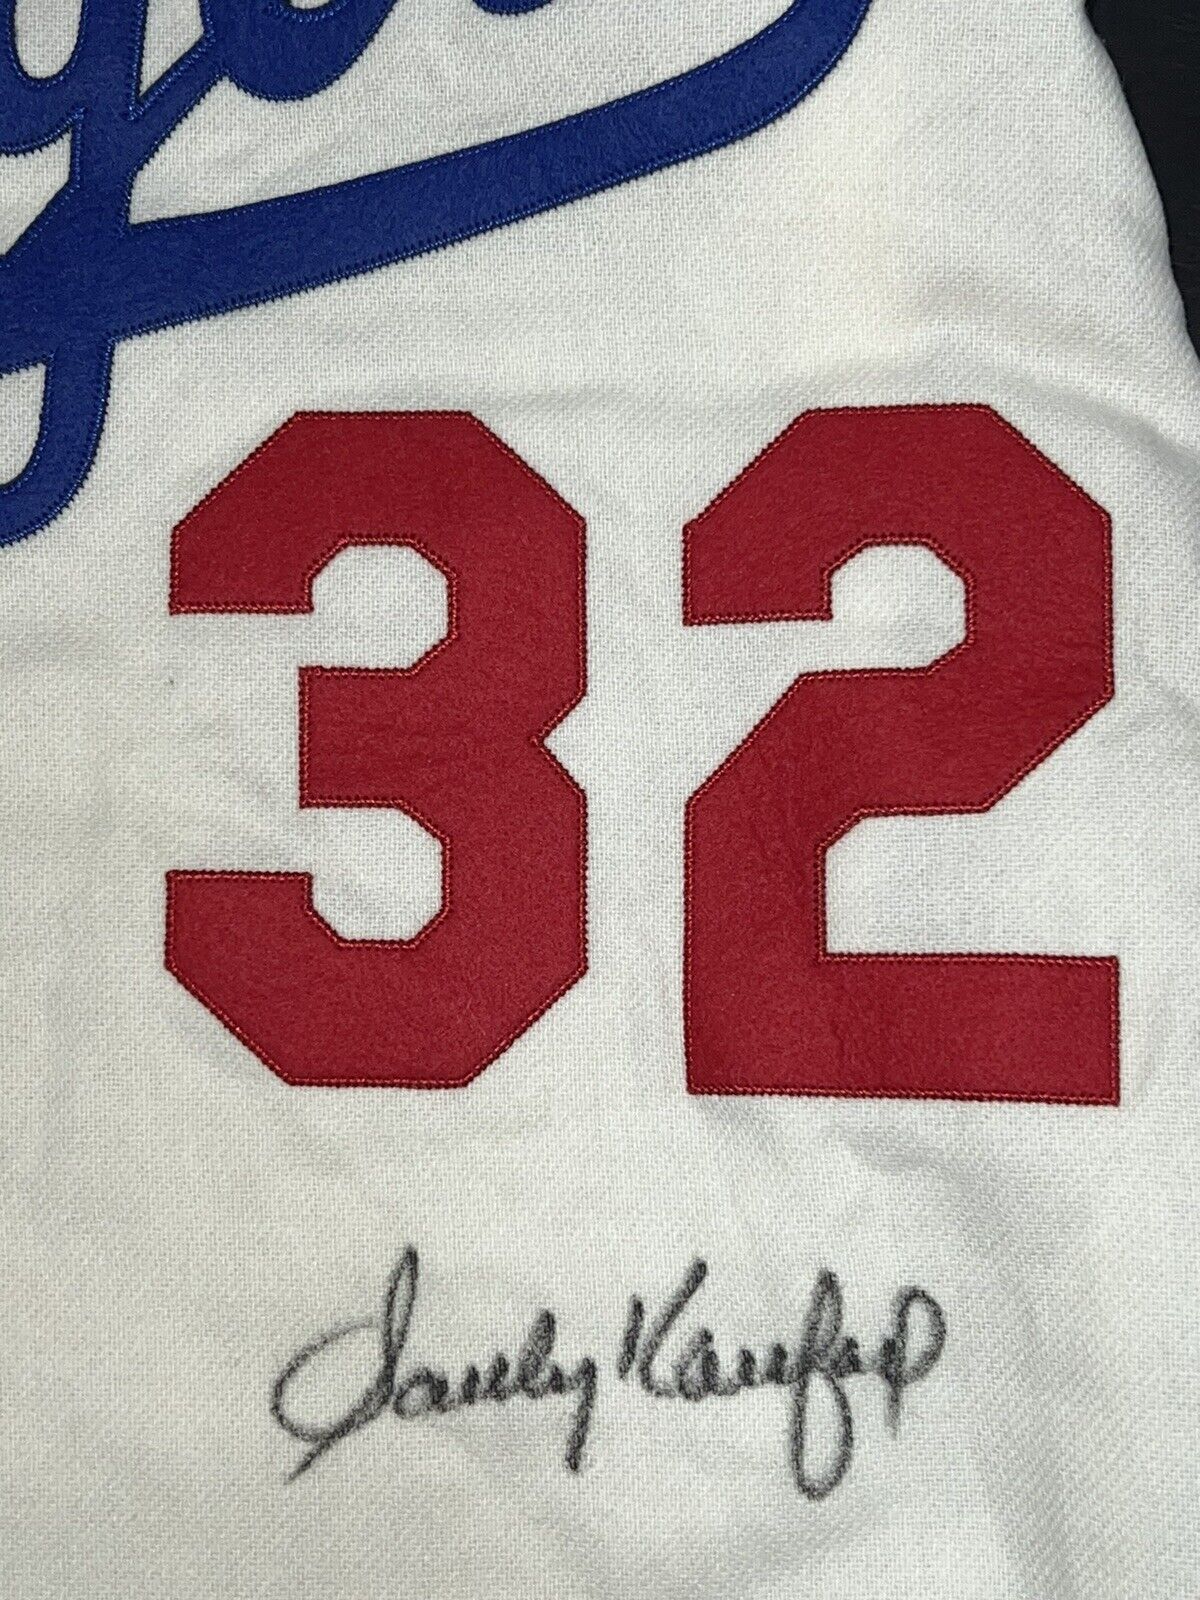 Charitybuzz: Sandy Koufax Signed Jersey Authentic Mitchell N Ness 1955